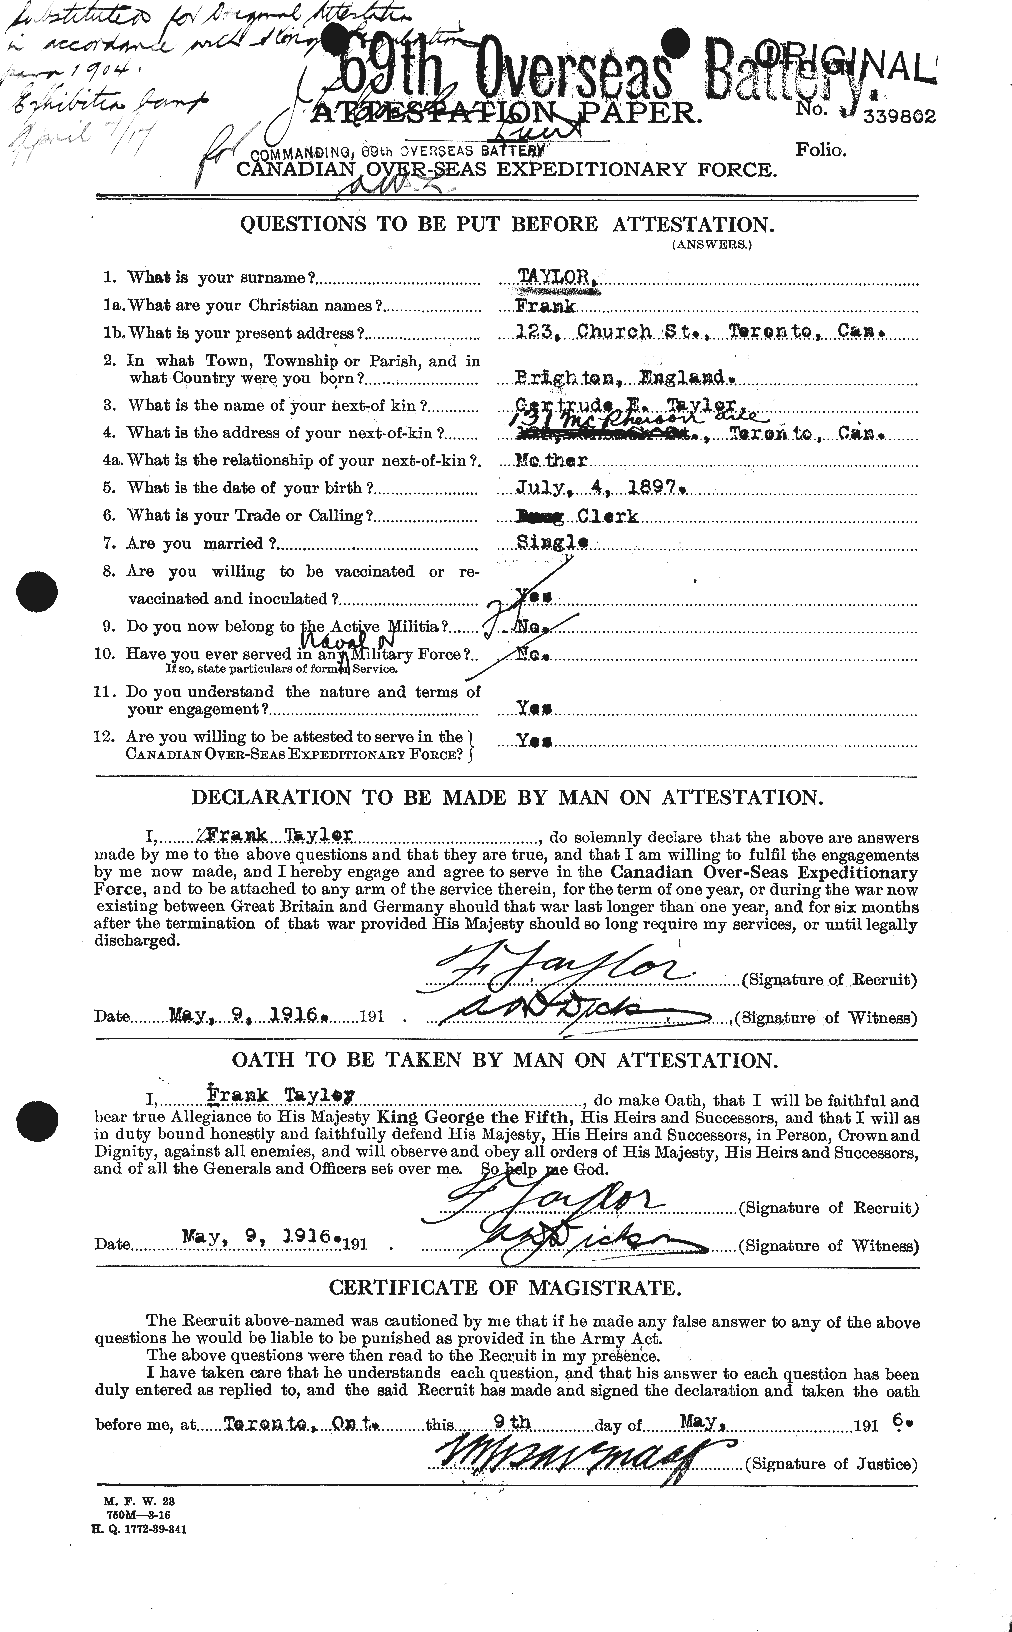 Personnel Records of the First World War - CEF 625713a